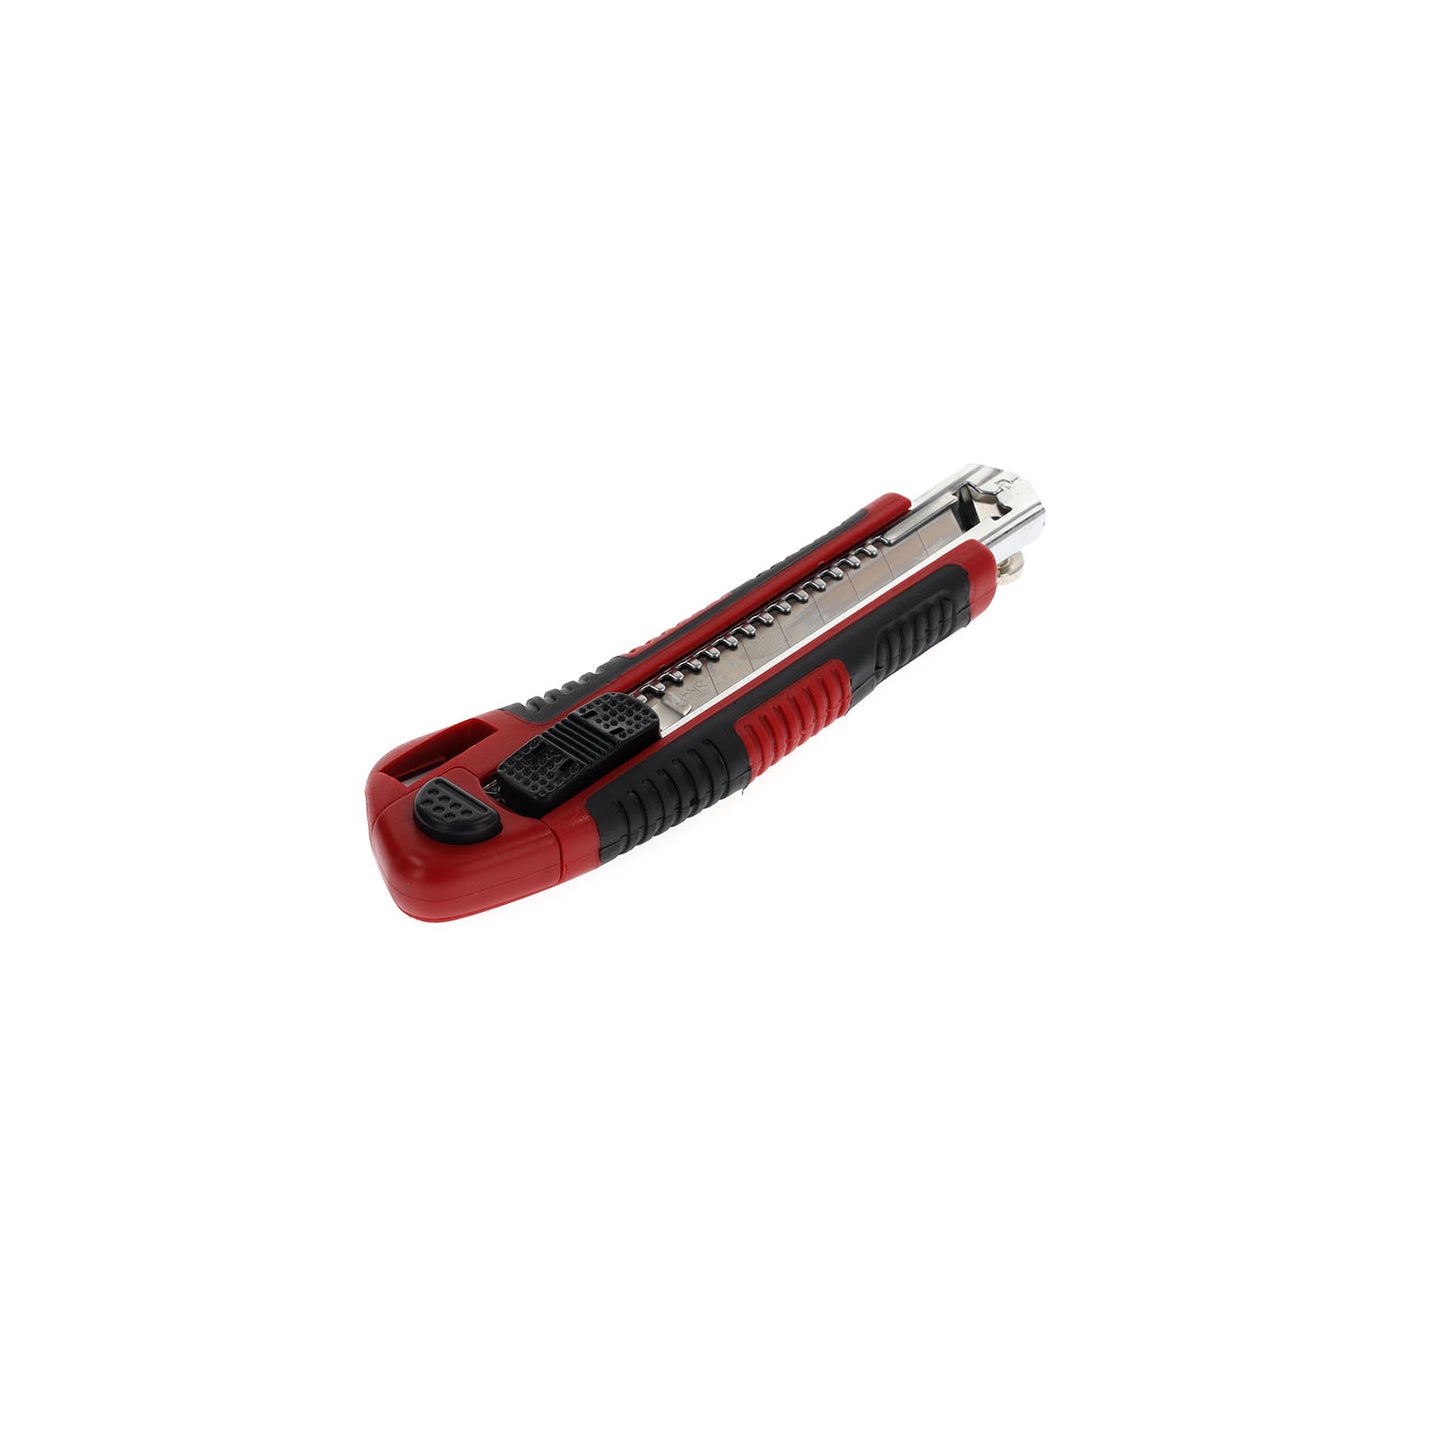 GEDORE red R93200018 - 18 mm cutter with pencil sharpener (3301603)